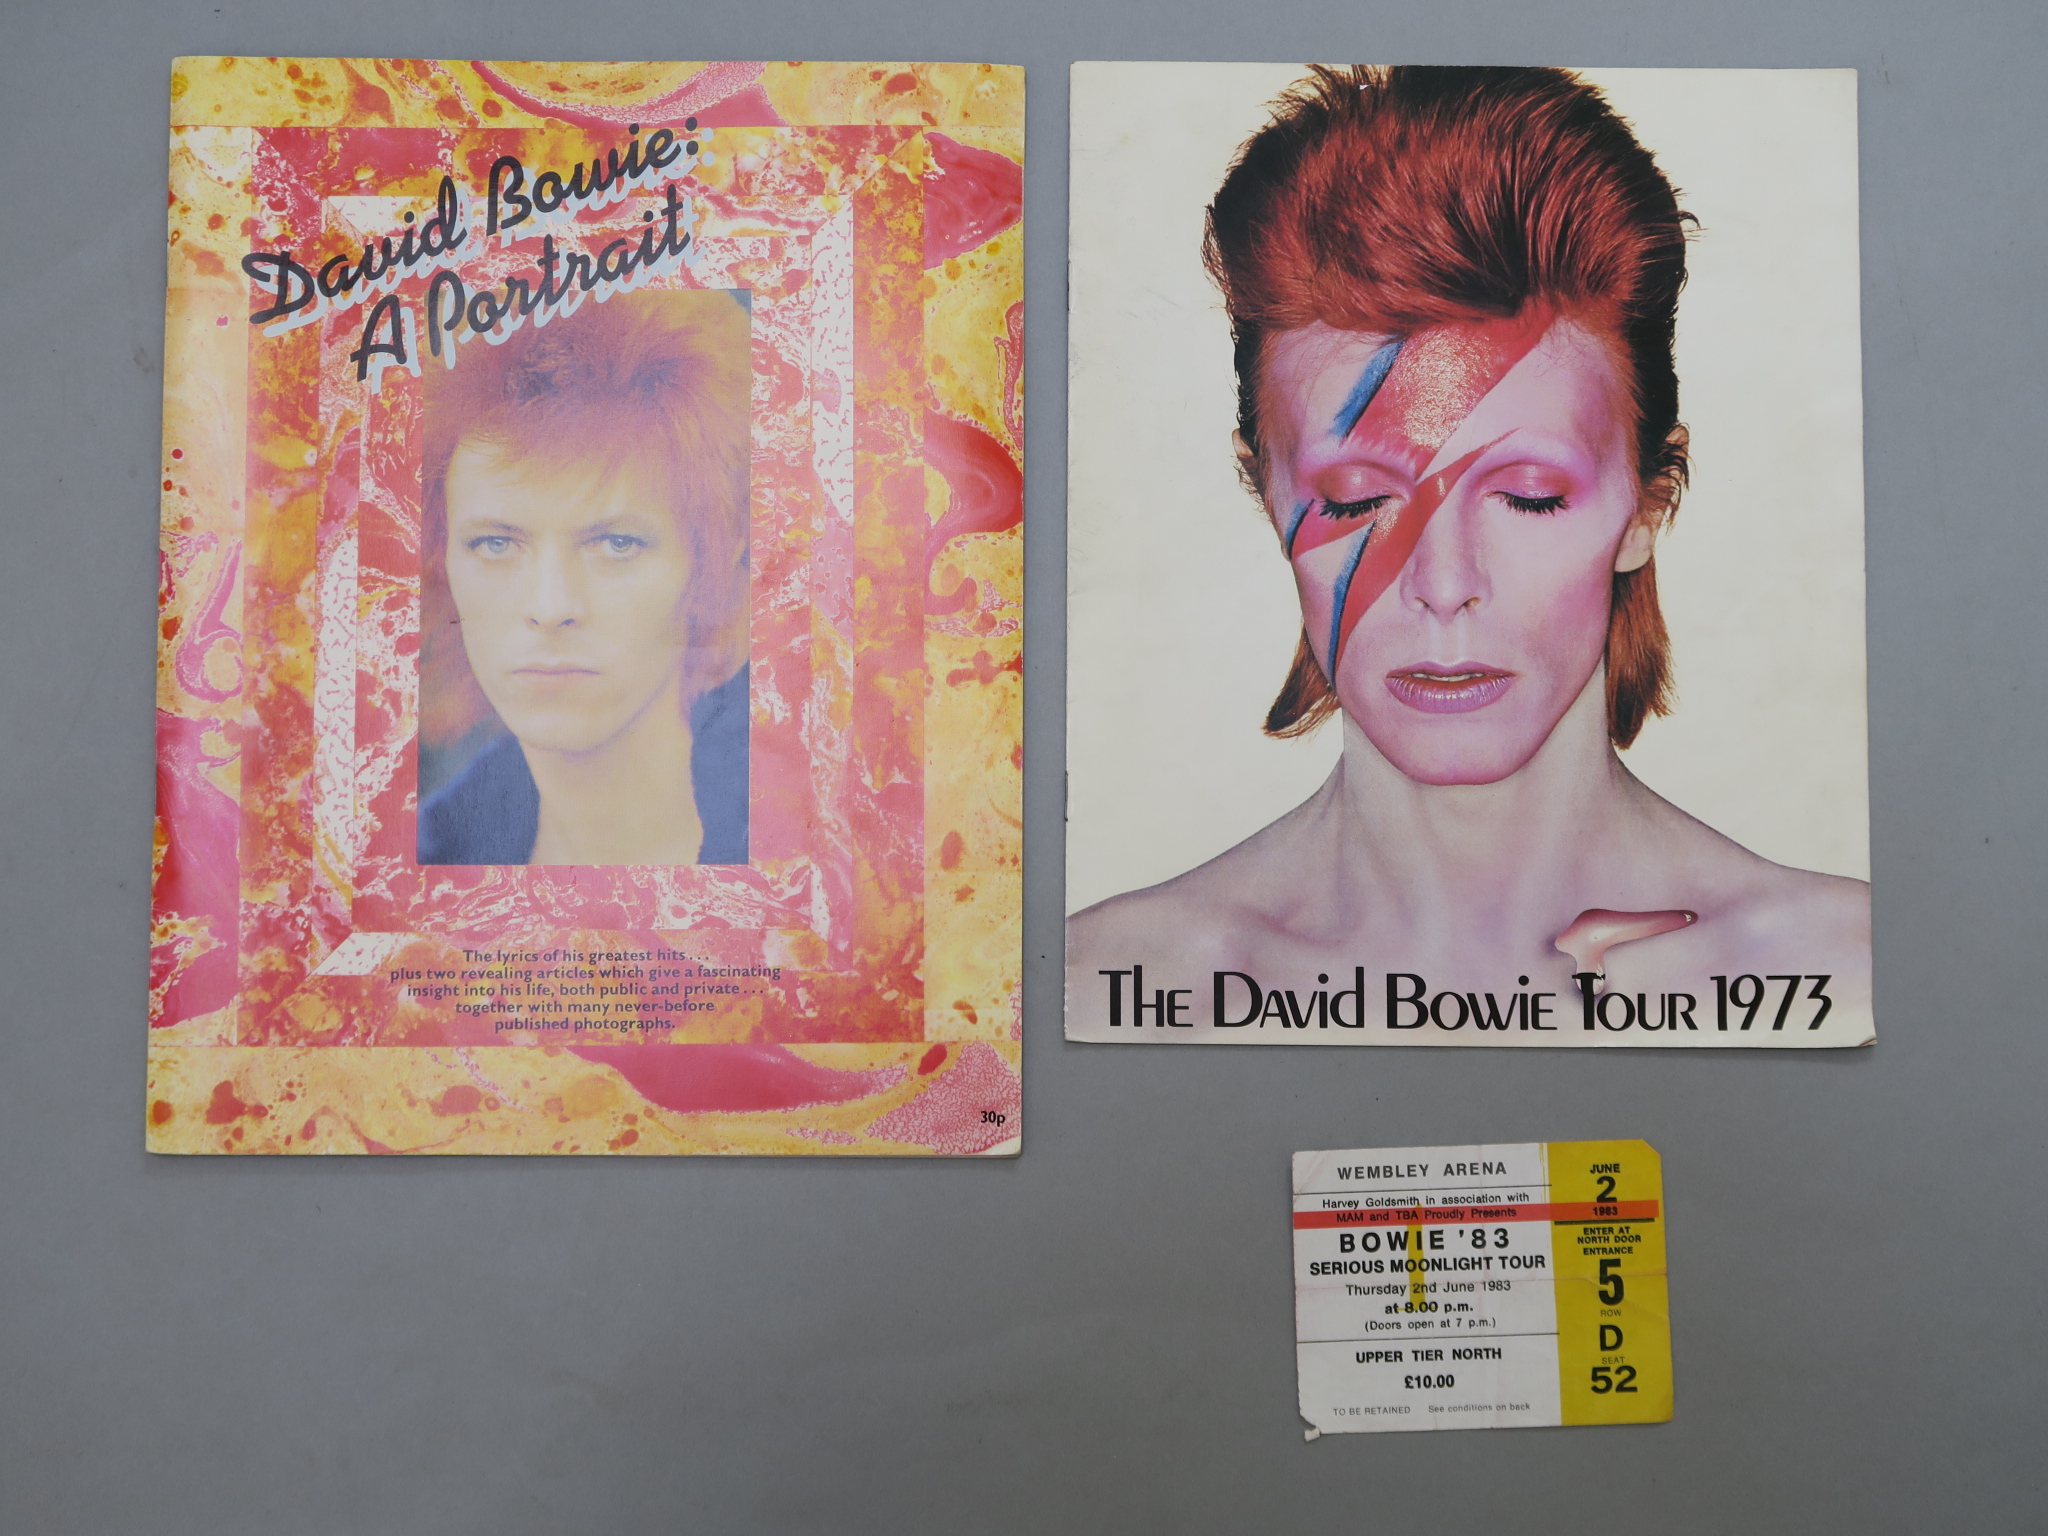 The David Bowie UK Tour II - 1973 original programme featuring full colour photos of David Bowie as